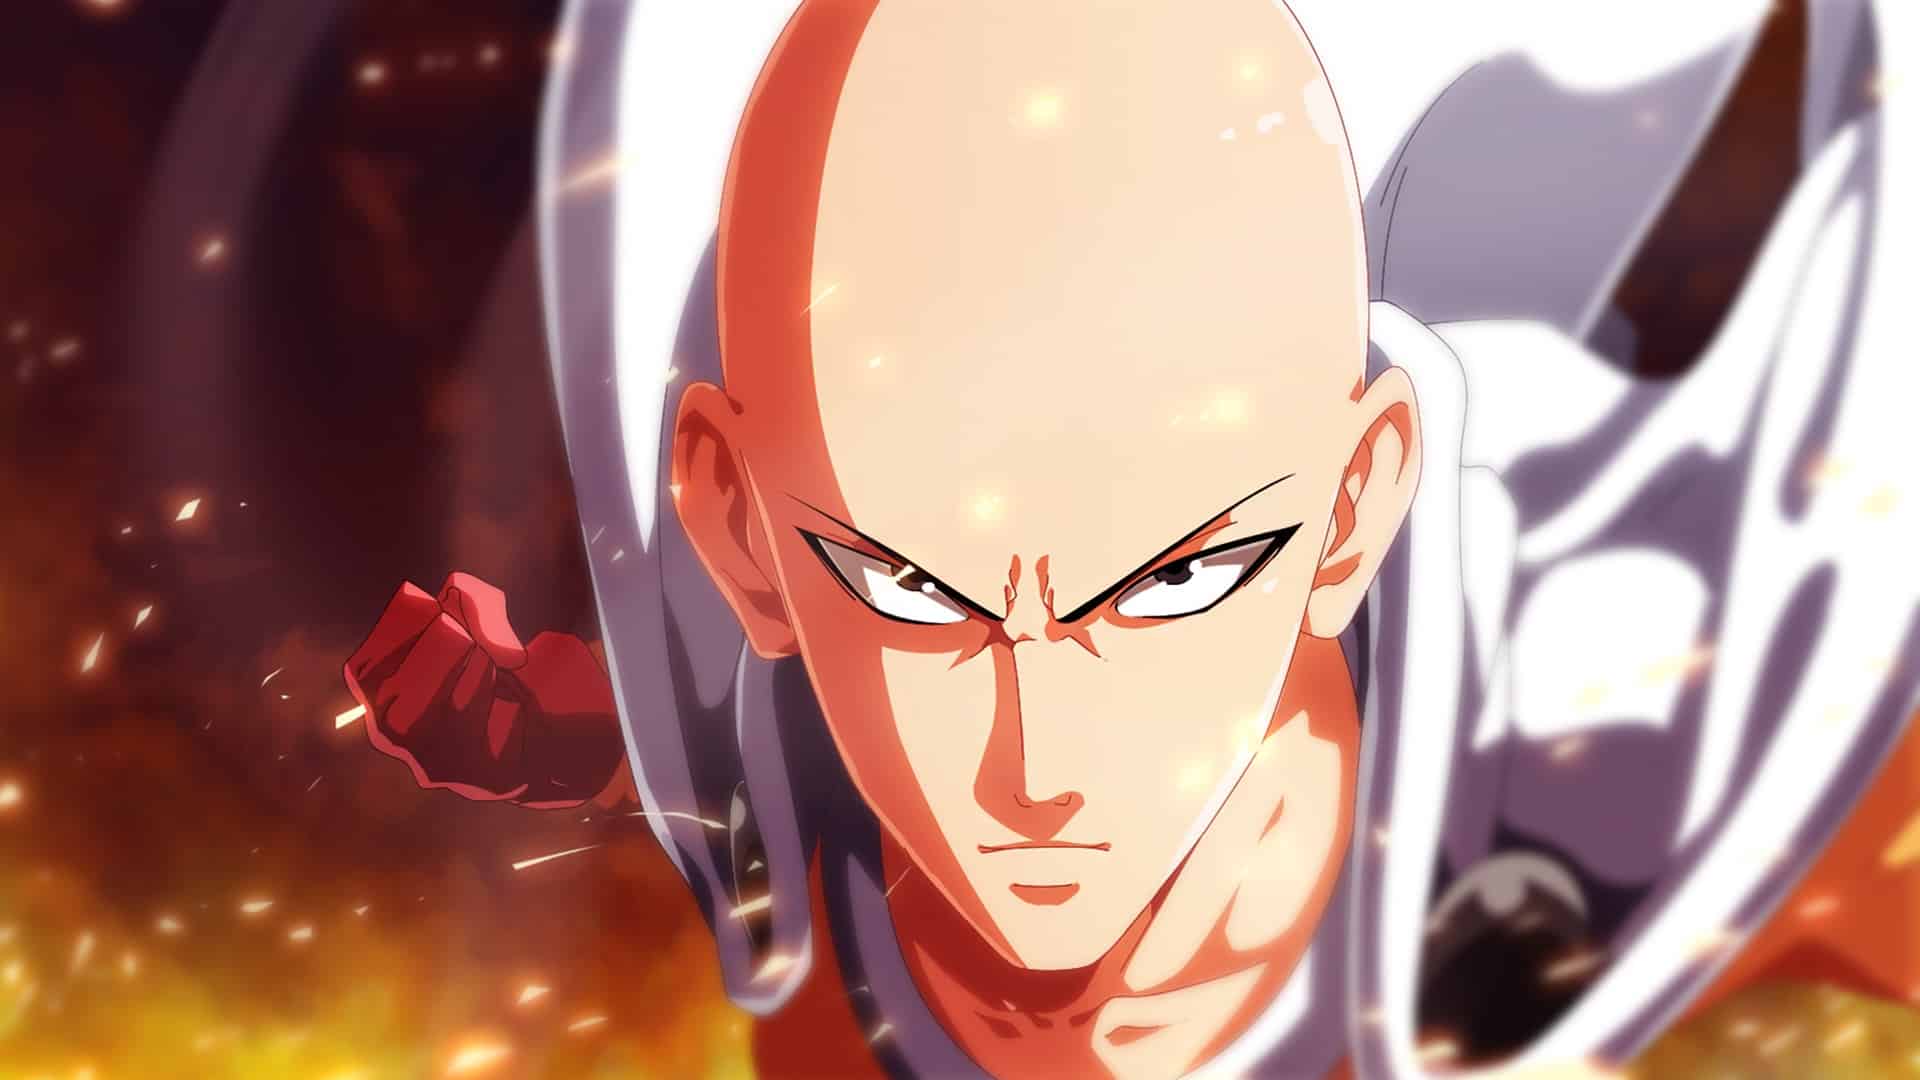 Powerful Anime Characters | The Strongest Anime Characters of All Time